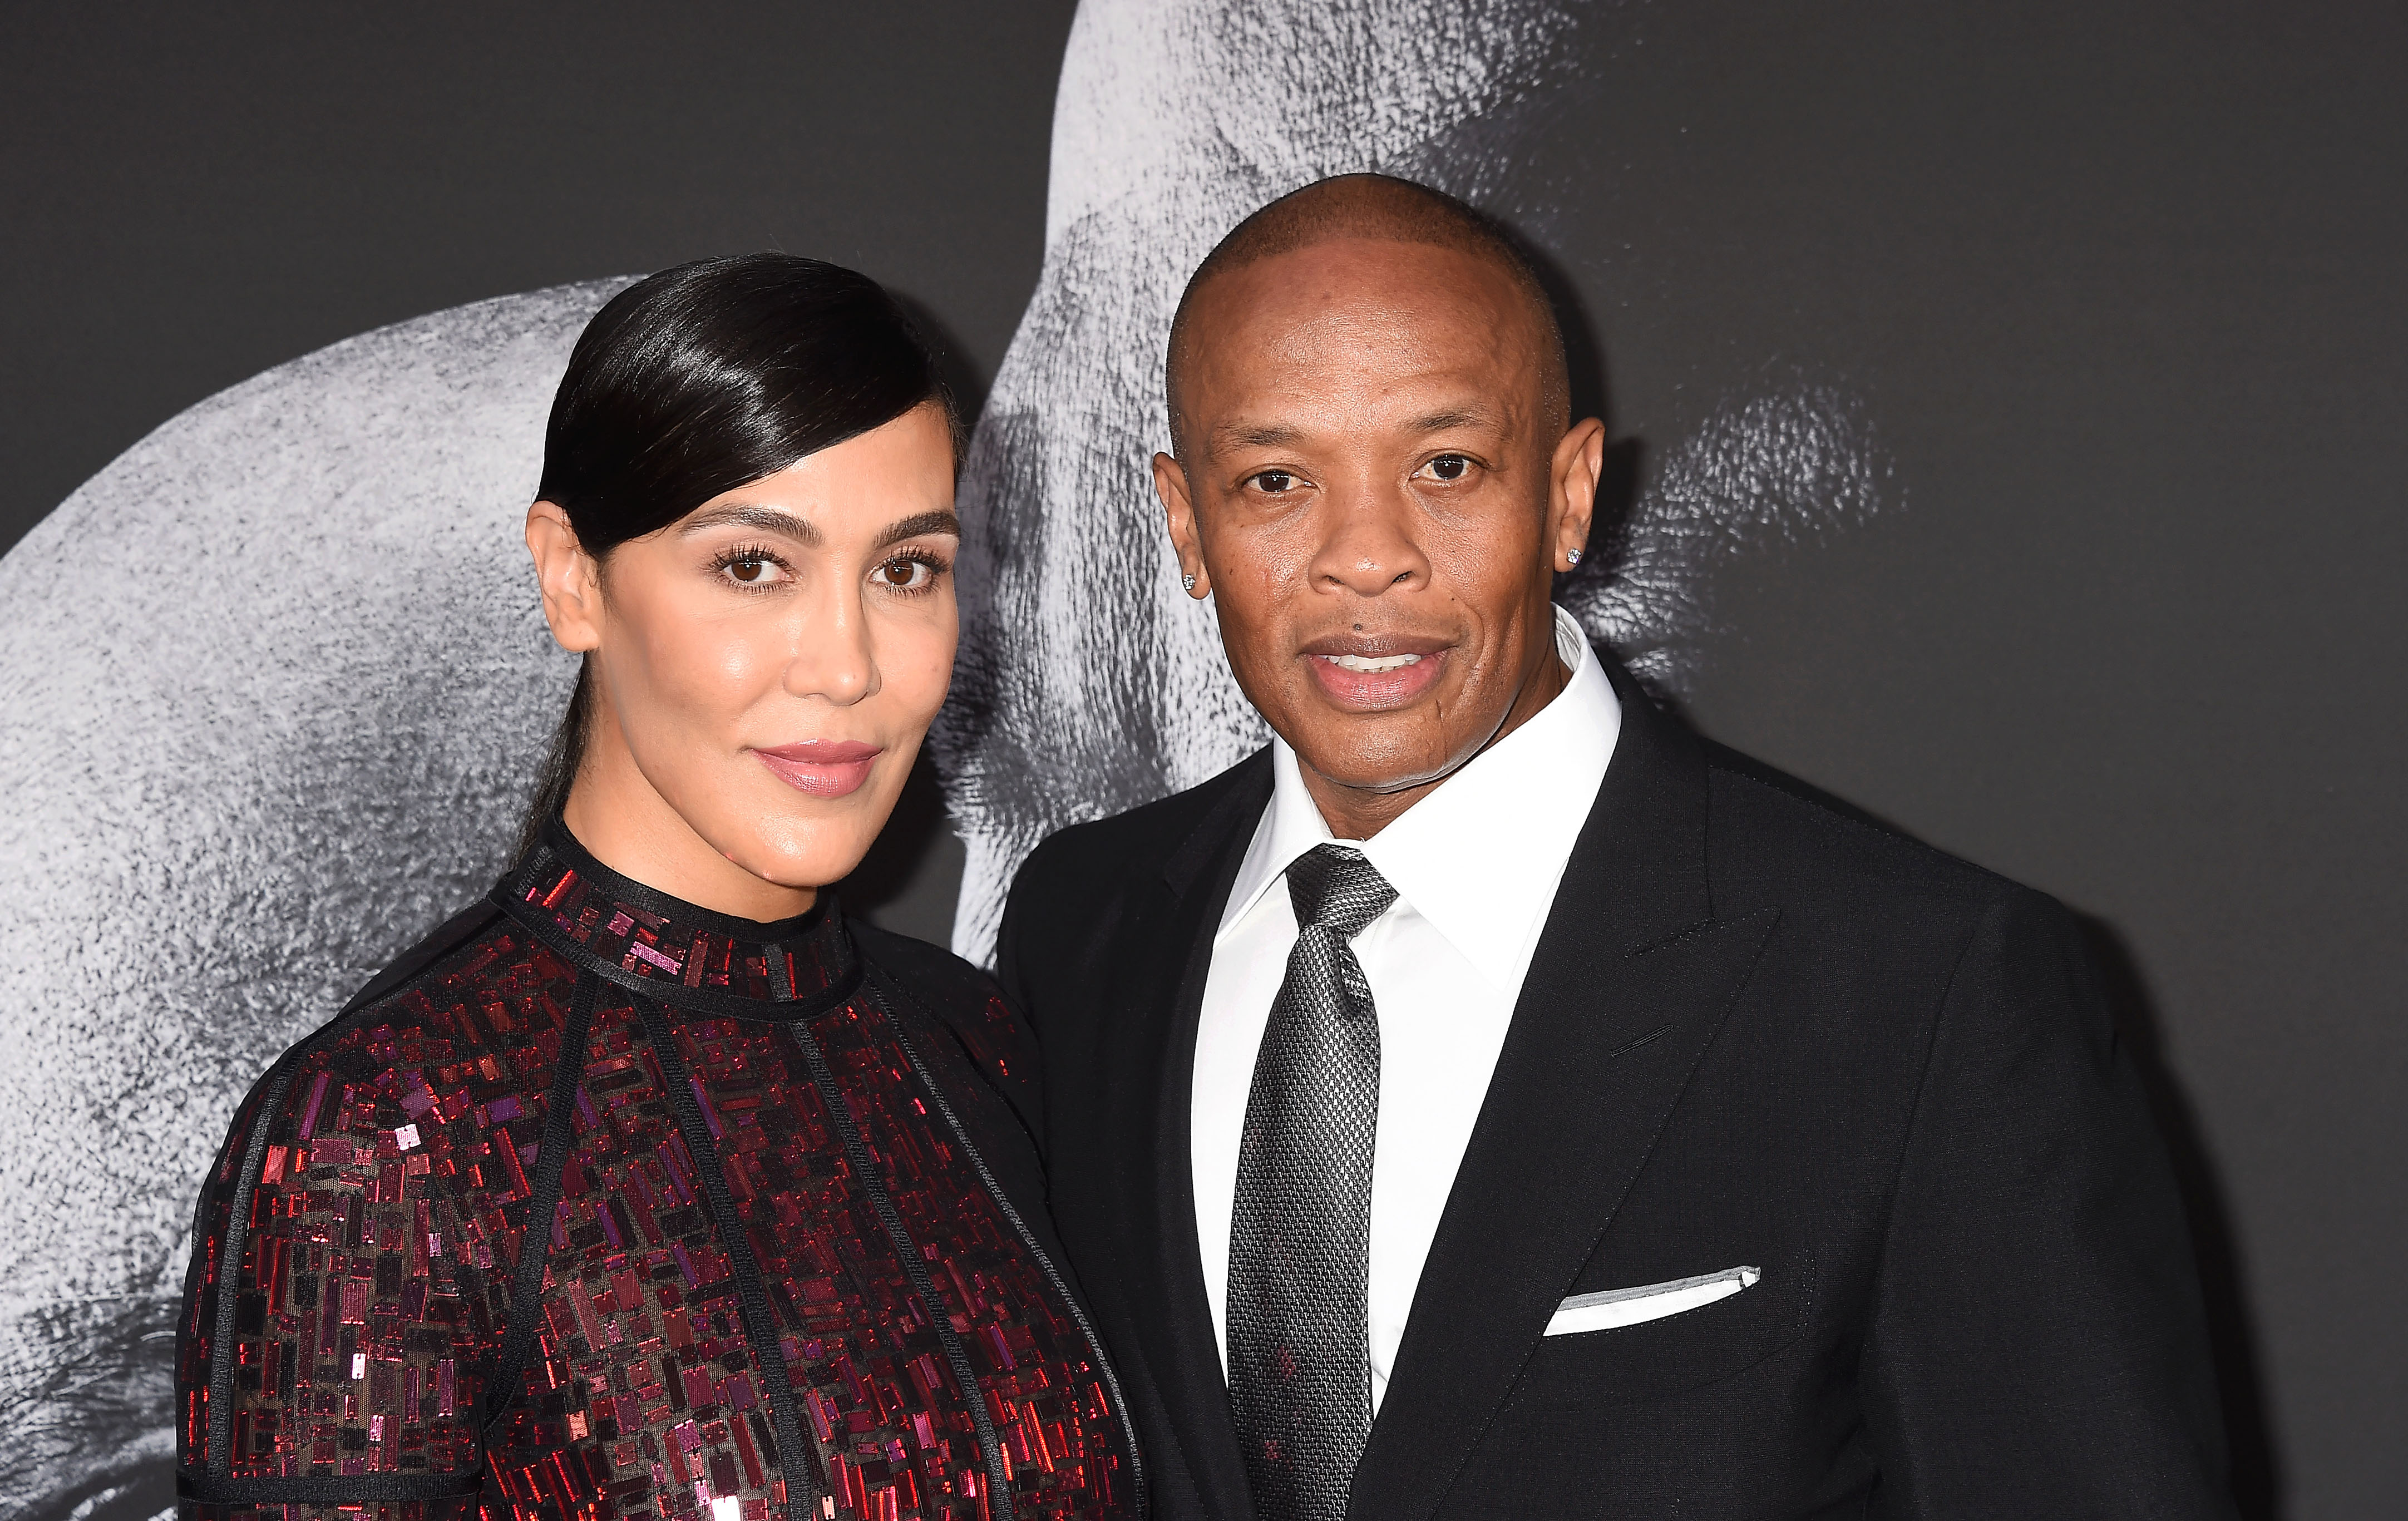 Nicole Threatt and Dr. Dre attend the premiere of HBO's 'The Defiant Ones' at Paramount Theatre on June 22, 2017, in Hollywood, California. | Source: Getty Images